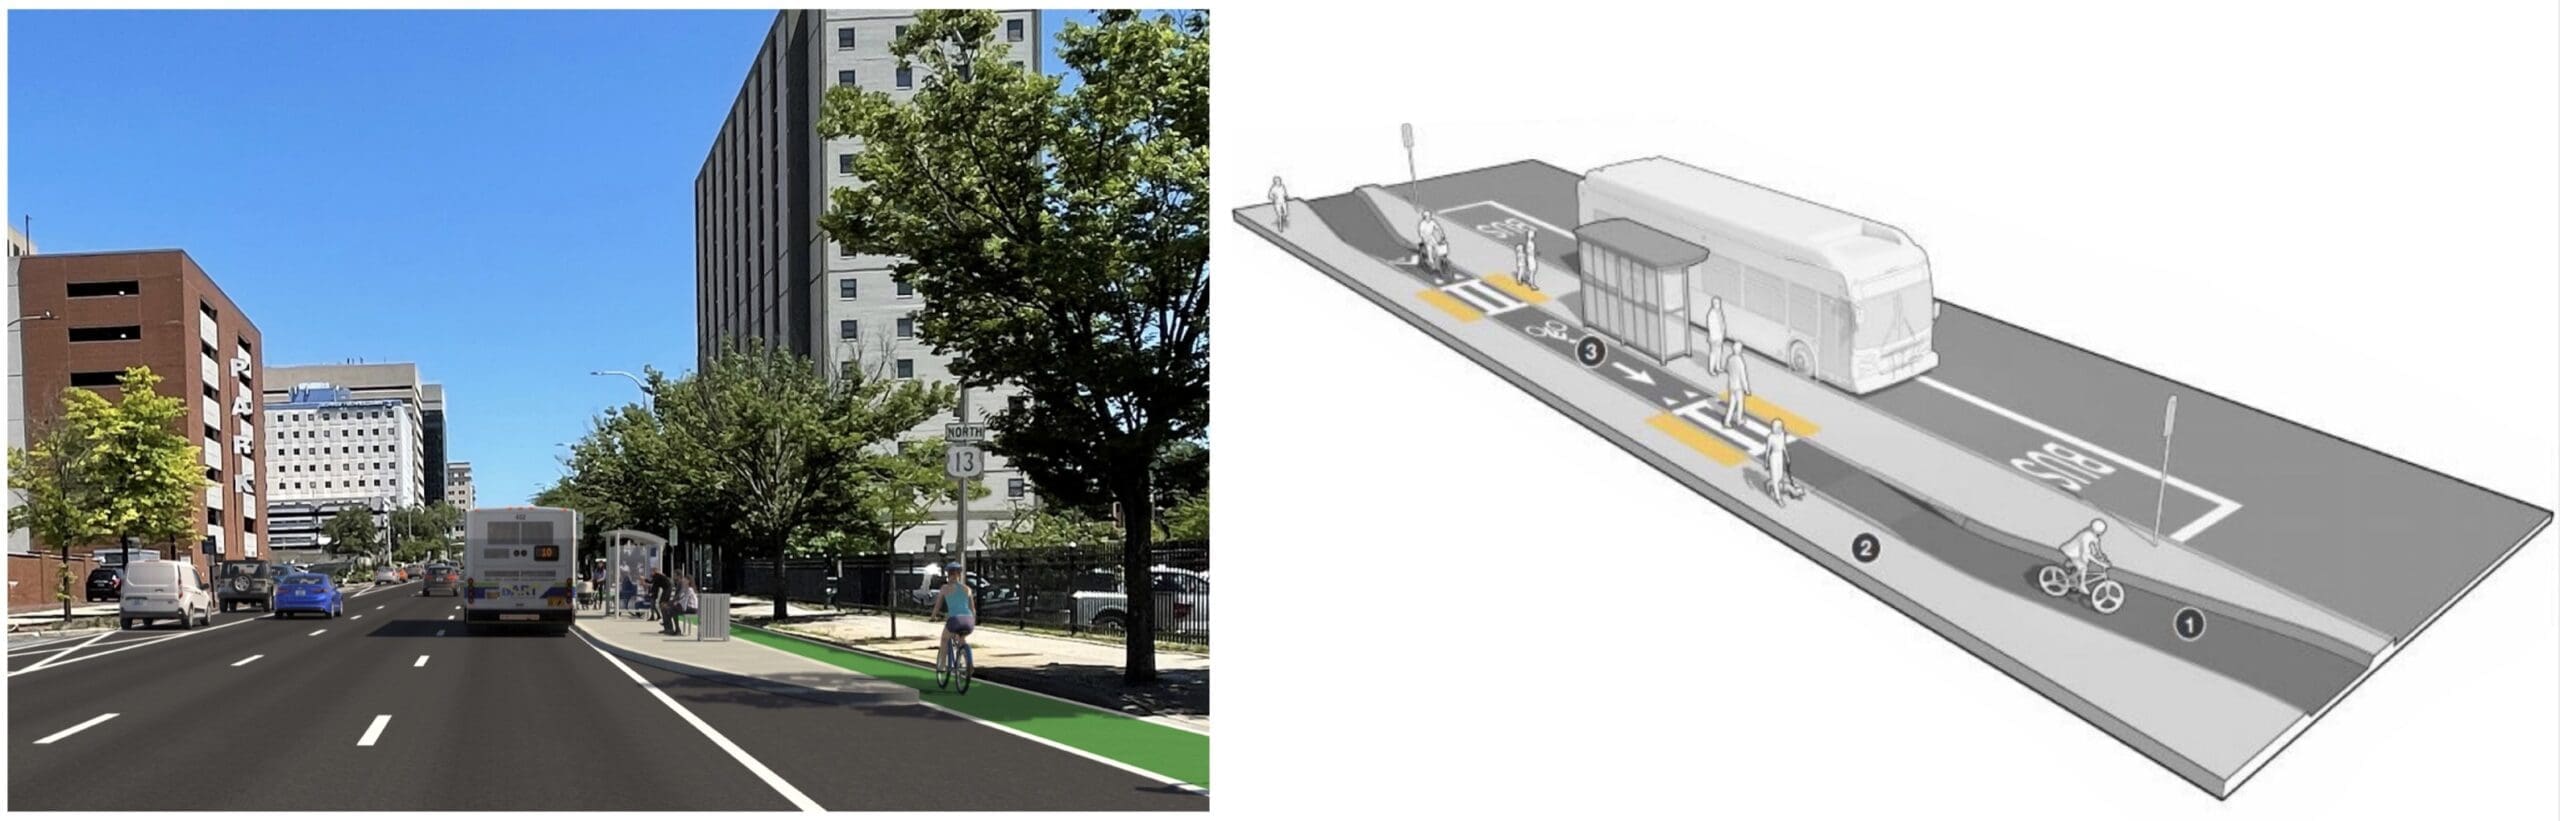 A floating bus stop proposed for Walnut Street in Wilmington is shown from two perspectives.